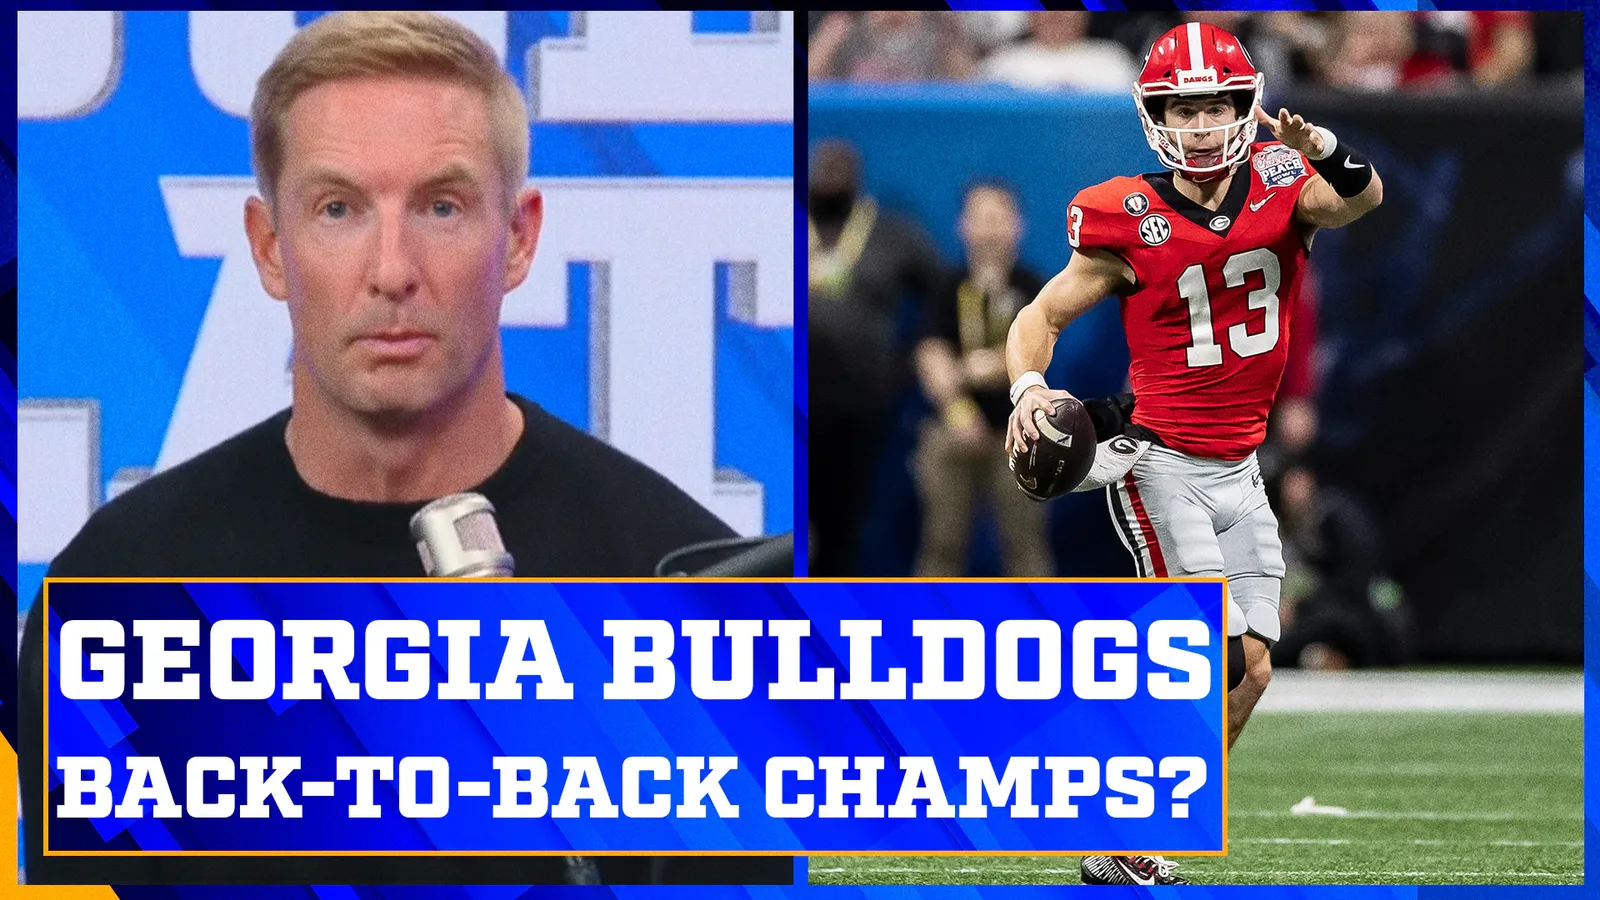 Can Georgia become the champion?